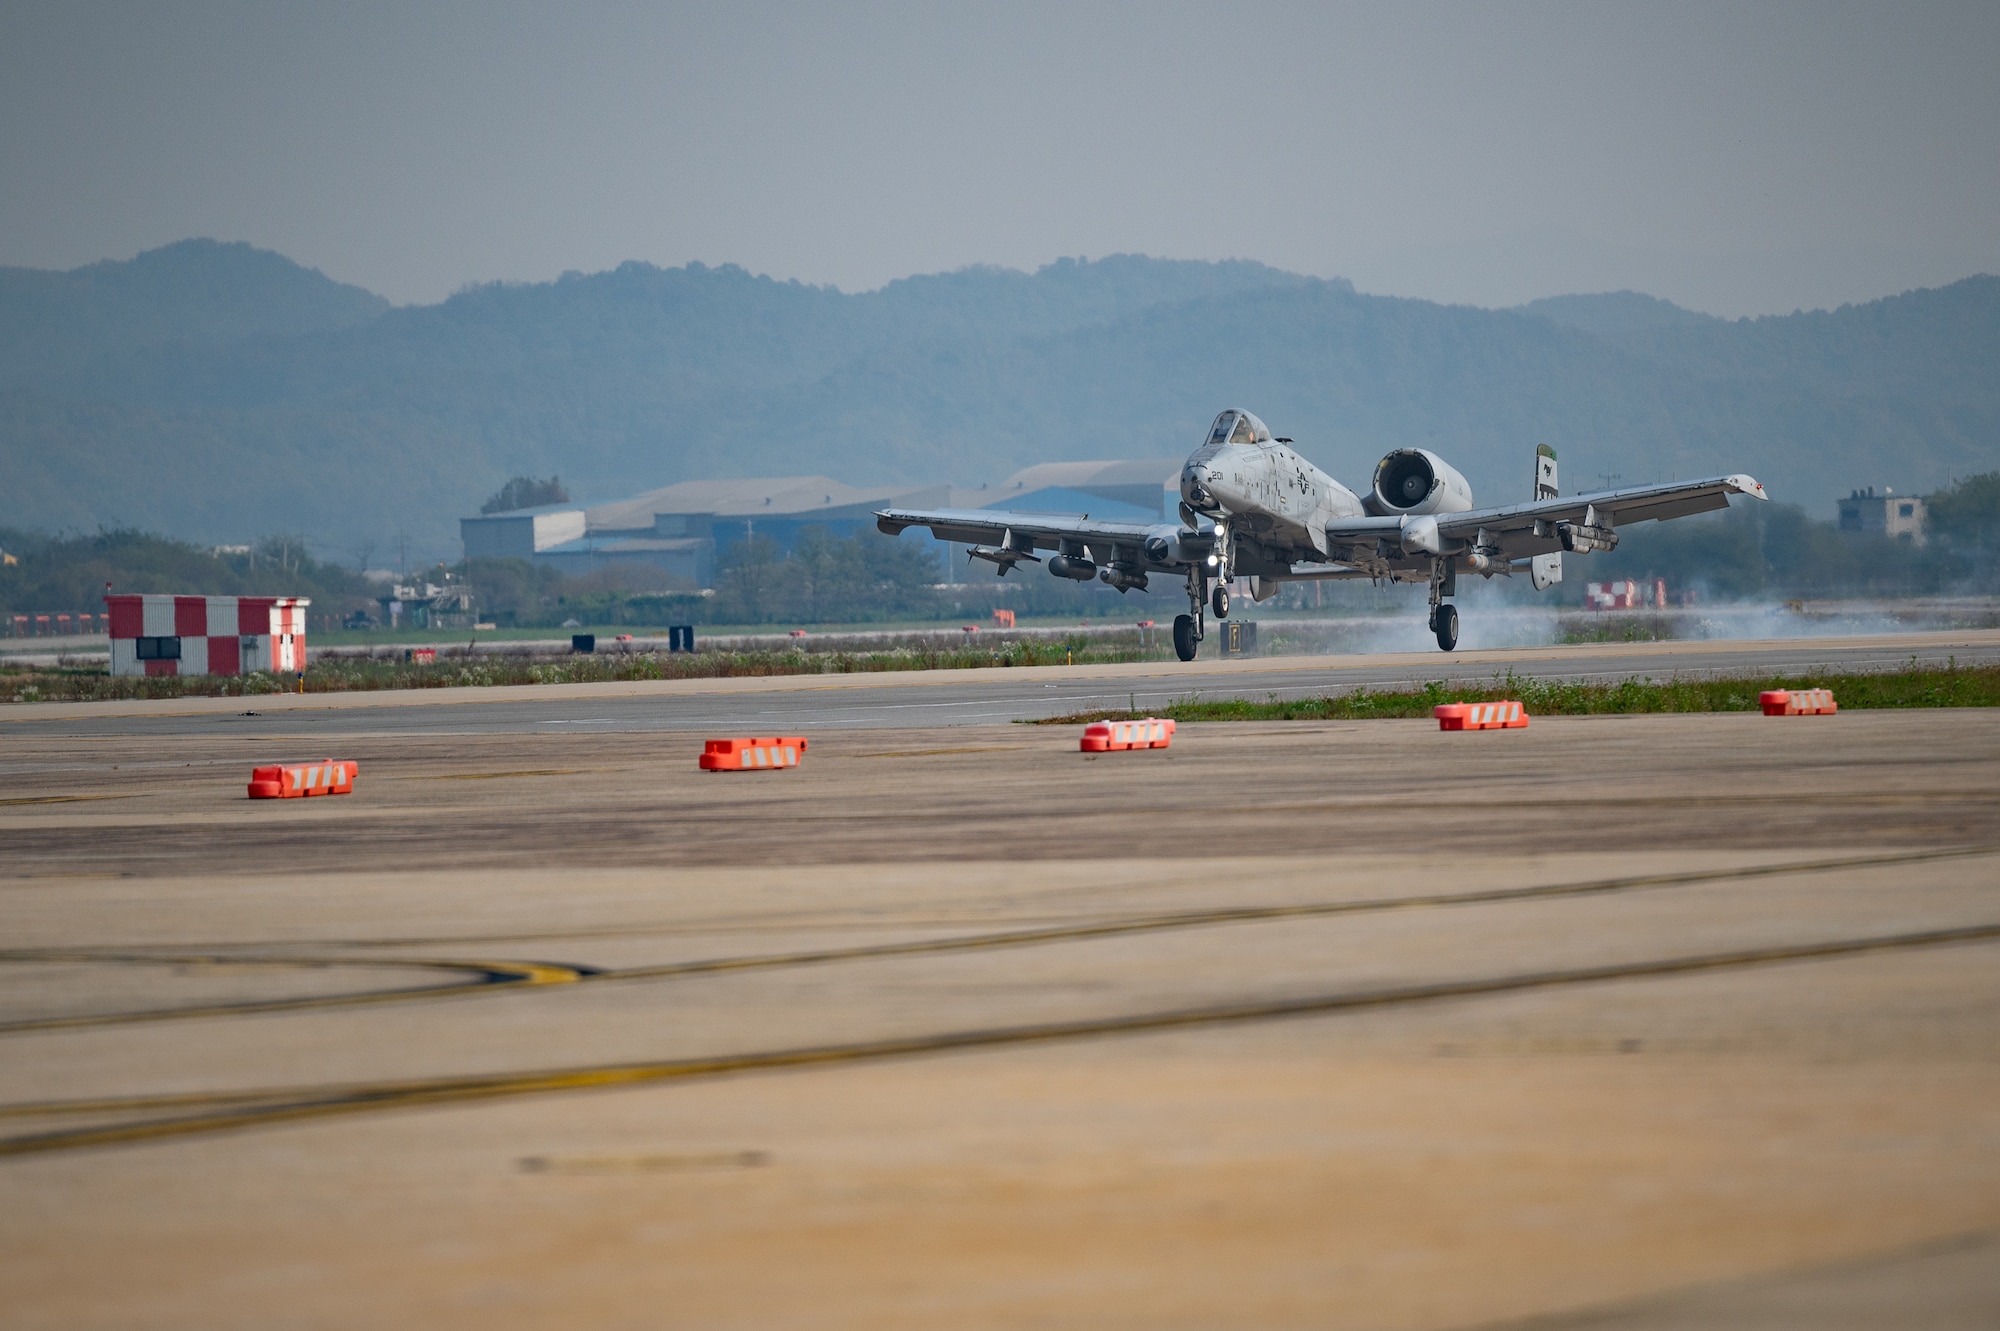 A U.S. Air Force A-10C Thunderbolt II lands on an alternate landing strip during Vigilant Defense 24 at Osan Air Base, Republic of Korea, Oct. 30, 2023. The reallocation of flightline space allows pilots to continue flying operations despite damage to the main runway. VD24 is a routine training event that tests the military capabilities across the peninsula, allowing combined and joint training at both the operational and tactical levels. (U.S. Air Force photo by Staff Sgt. Thomas Sjoberg)